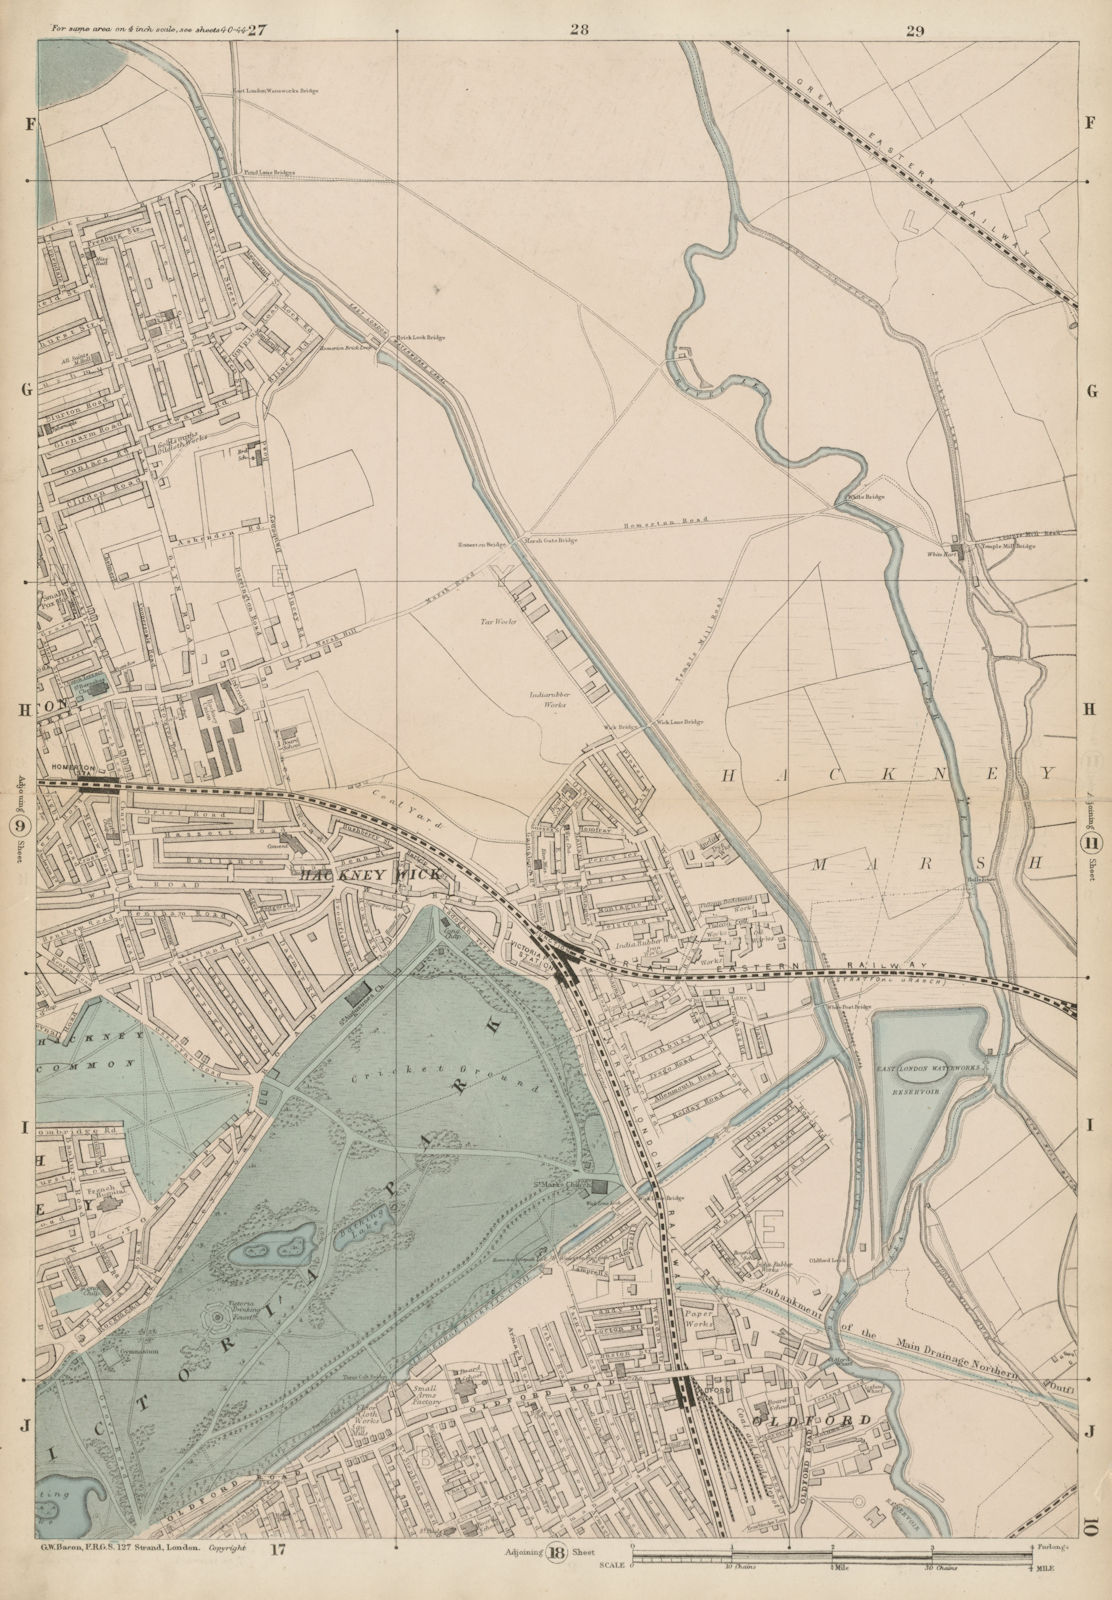 HACKNEY WICK/Marshes Victoria Park Old Ford Homerton Clapton Leyton c1887 map